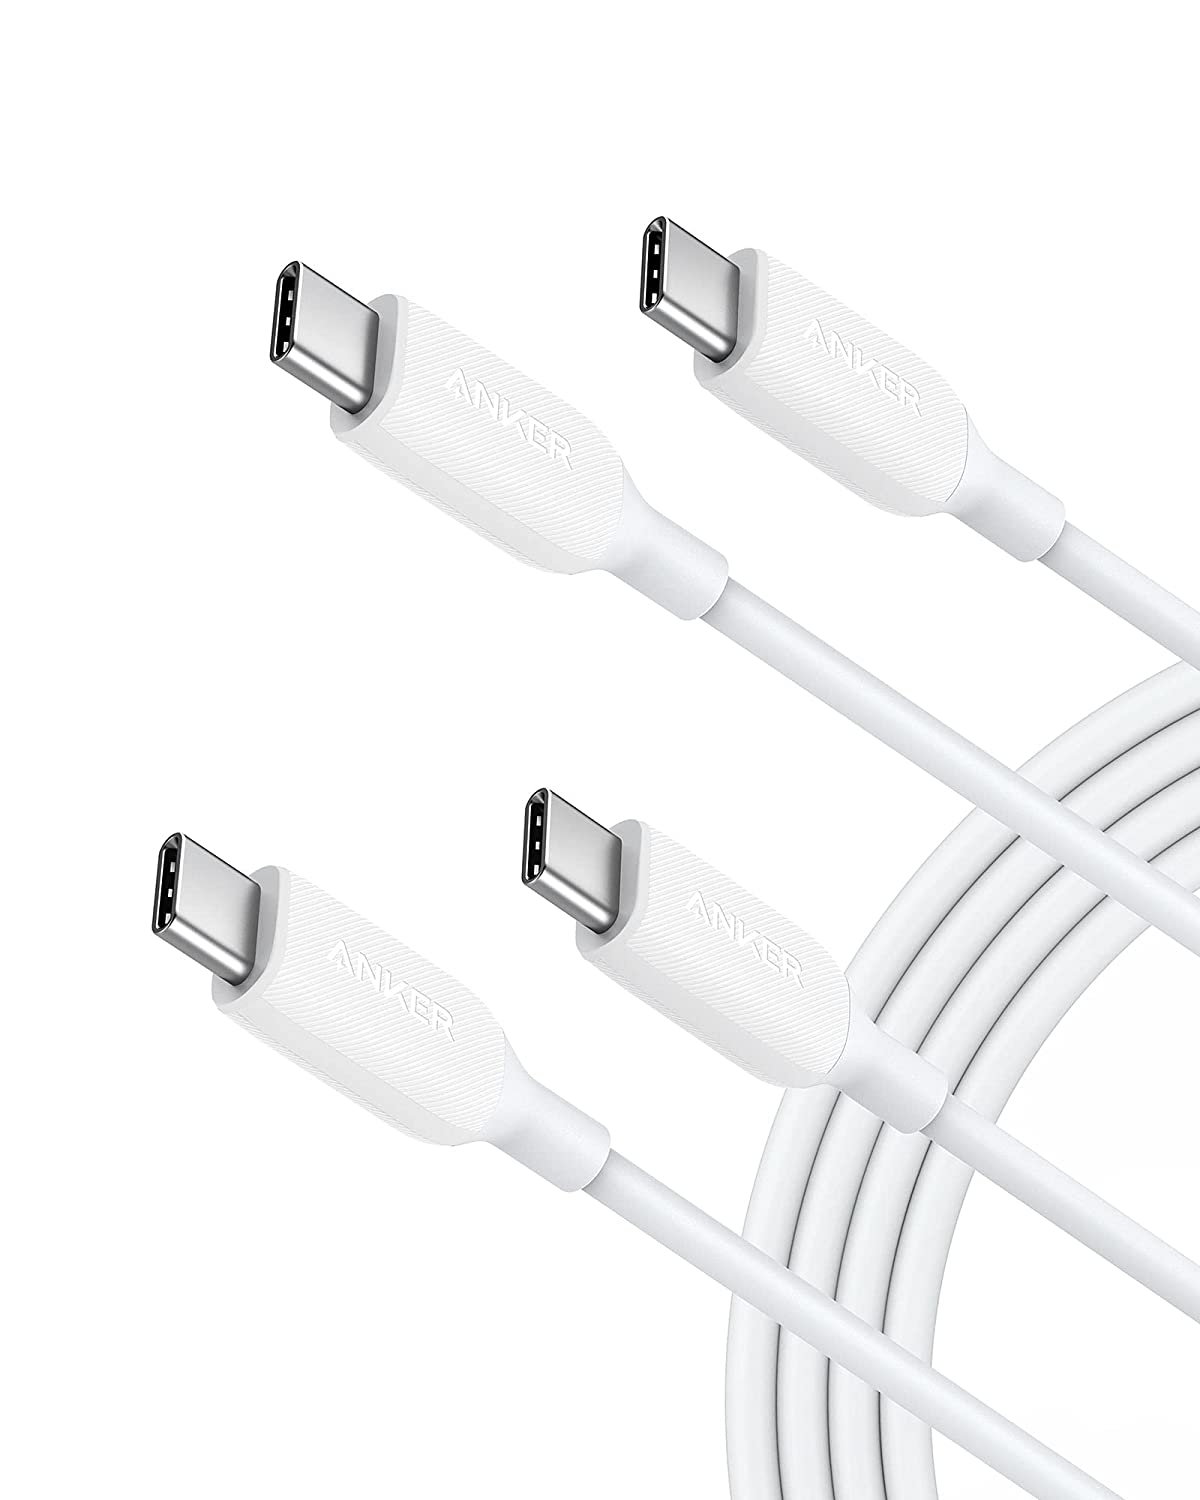 White Anker (2 Pack) Powerline III USB C to USB C Charge Cable 100w 6ft USB 2.0 Only - $16.99